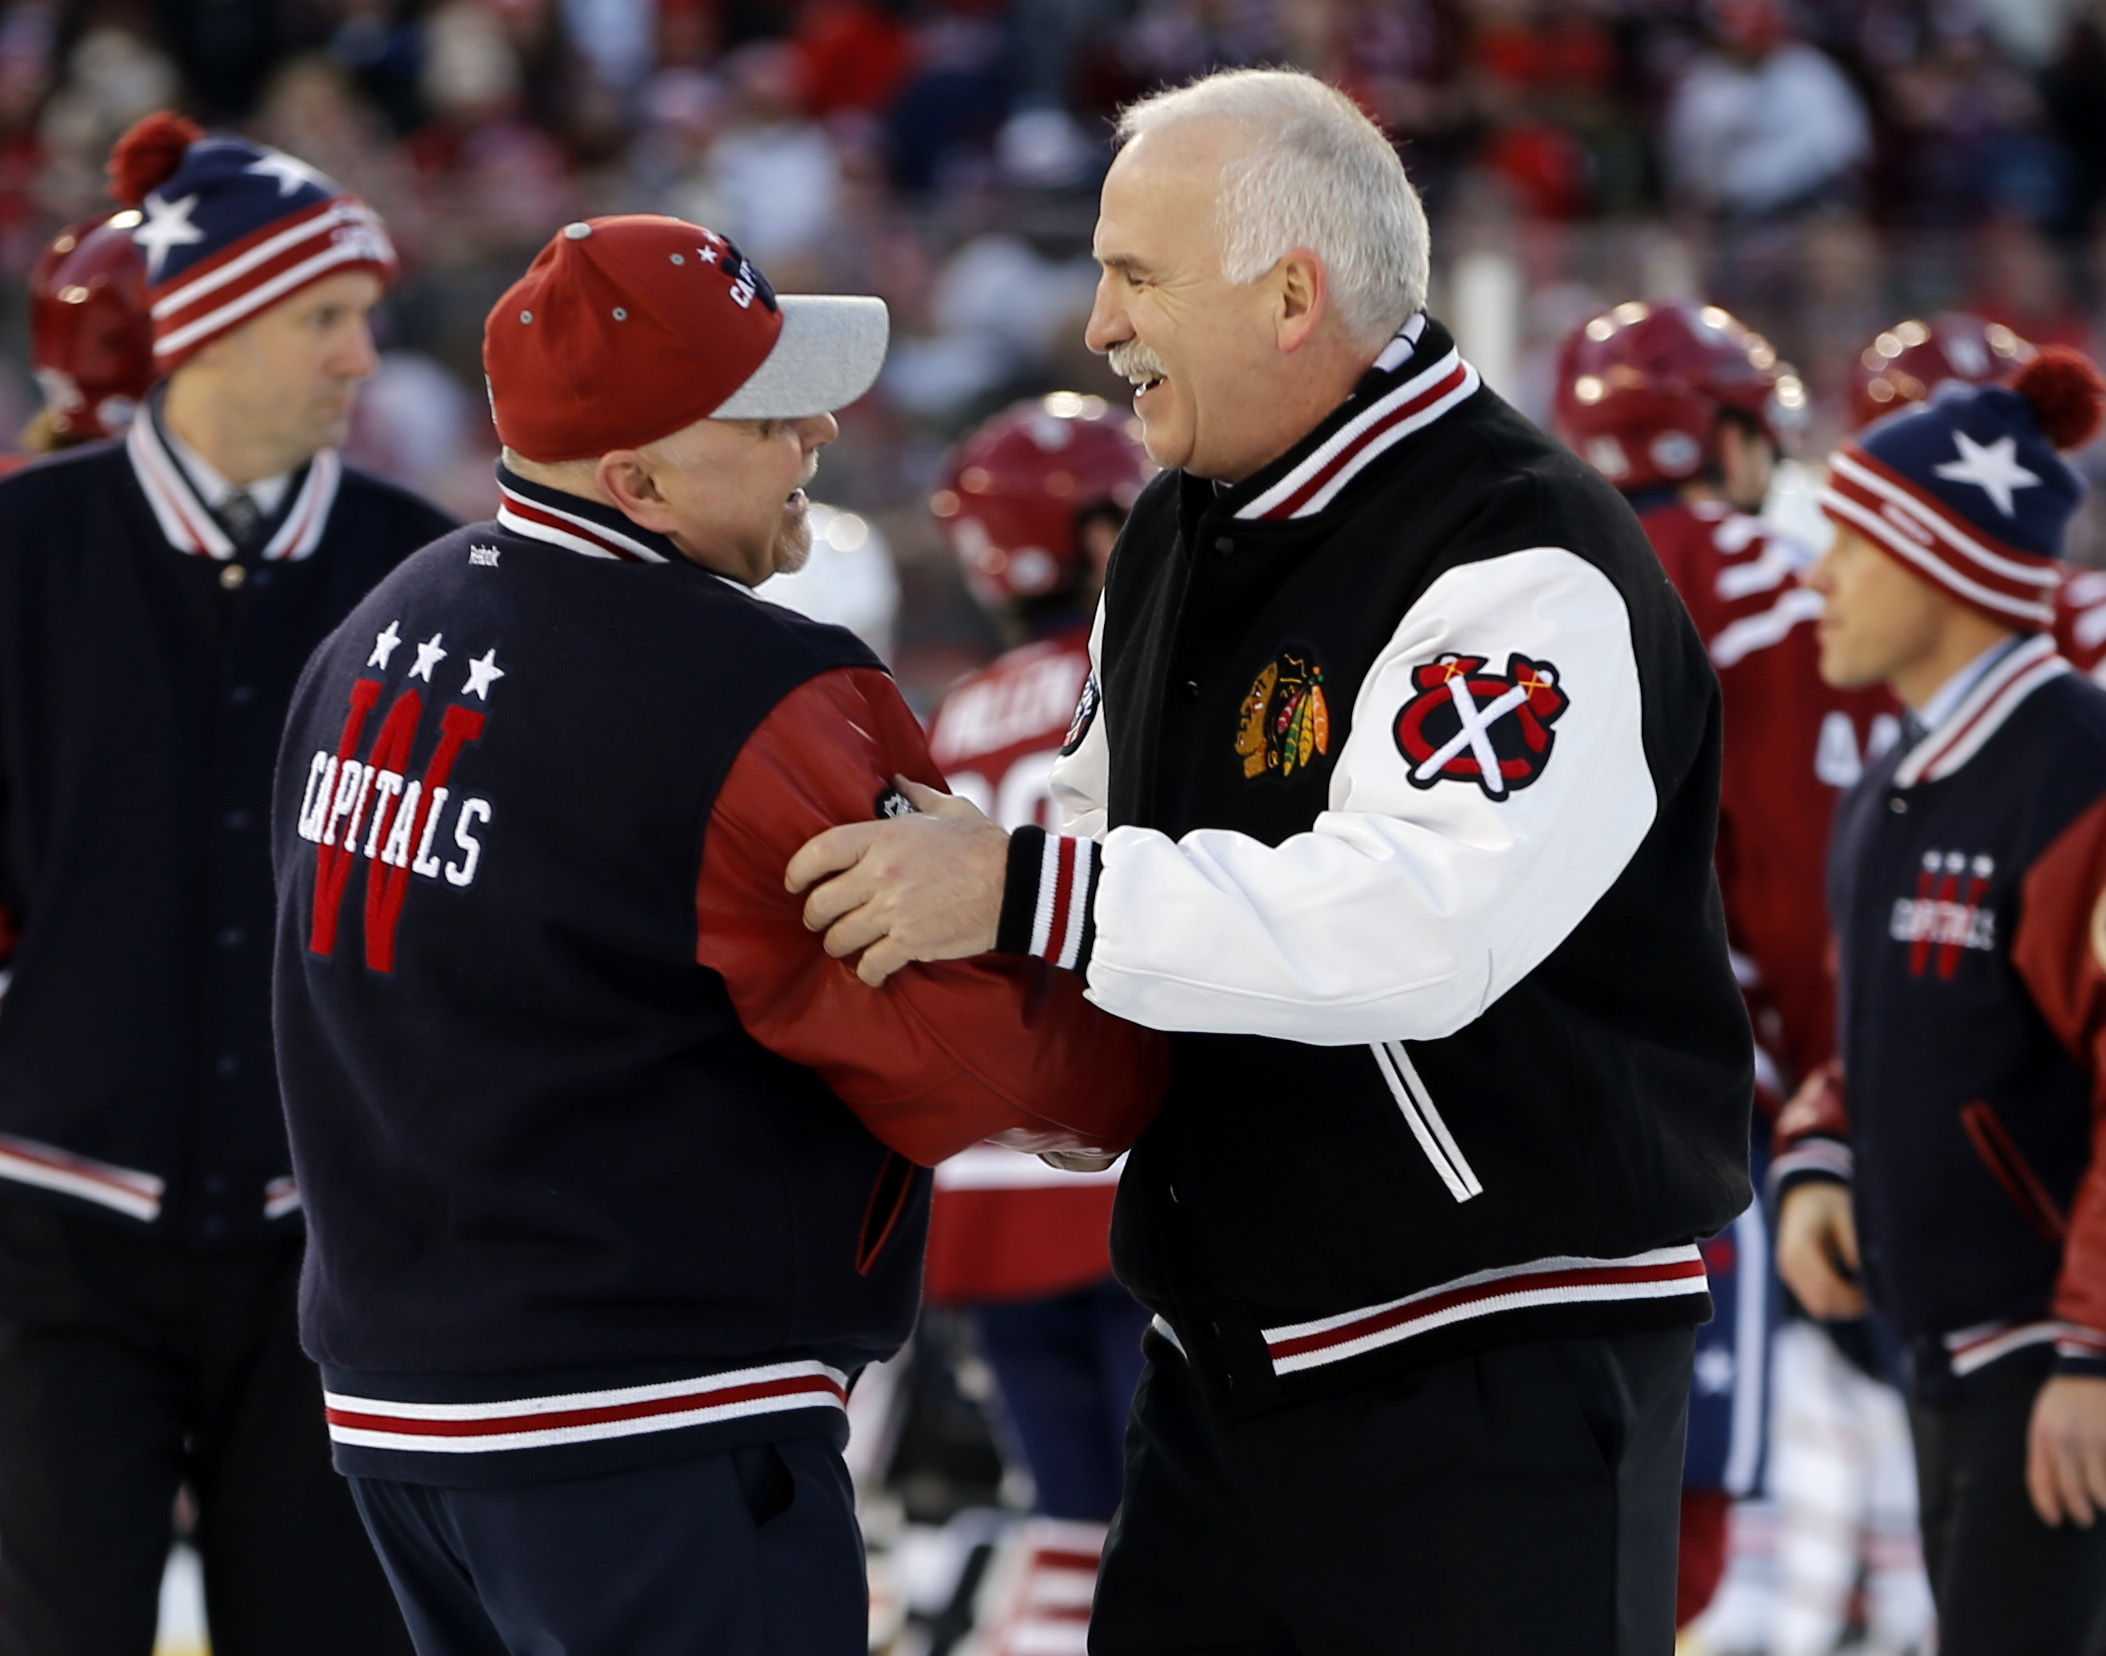 Jan 1, 2015; Washington, DC, USA; Washington Capitals head coach Barry Trotz (left) shakes hands with Chicago Blackhawks head coach Joel Quenneville (right) after the 2015 Winter Classic hockey game at Nationals Park. (Geoff Burke-USA TODAY Sports)